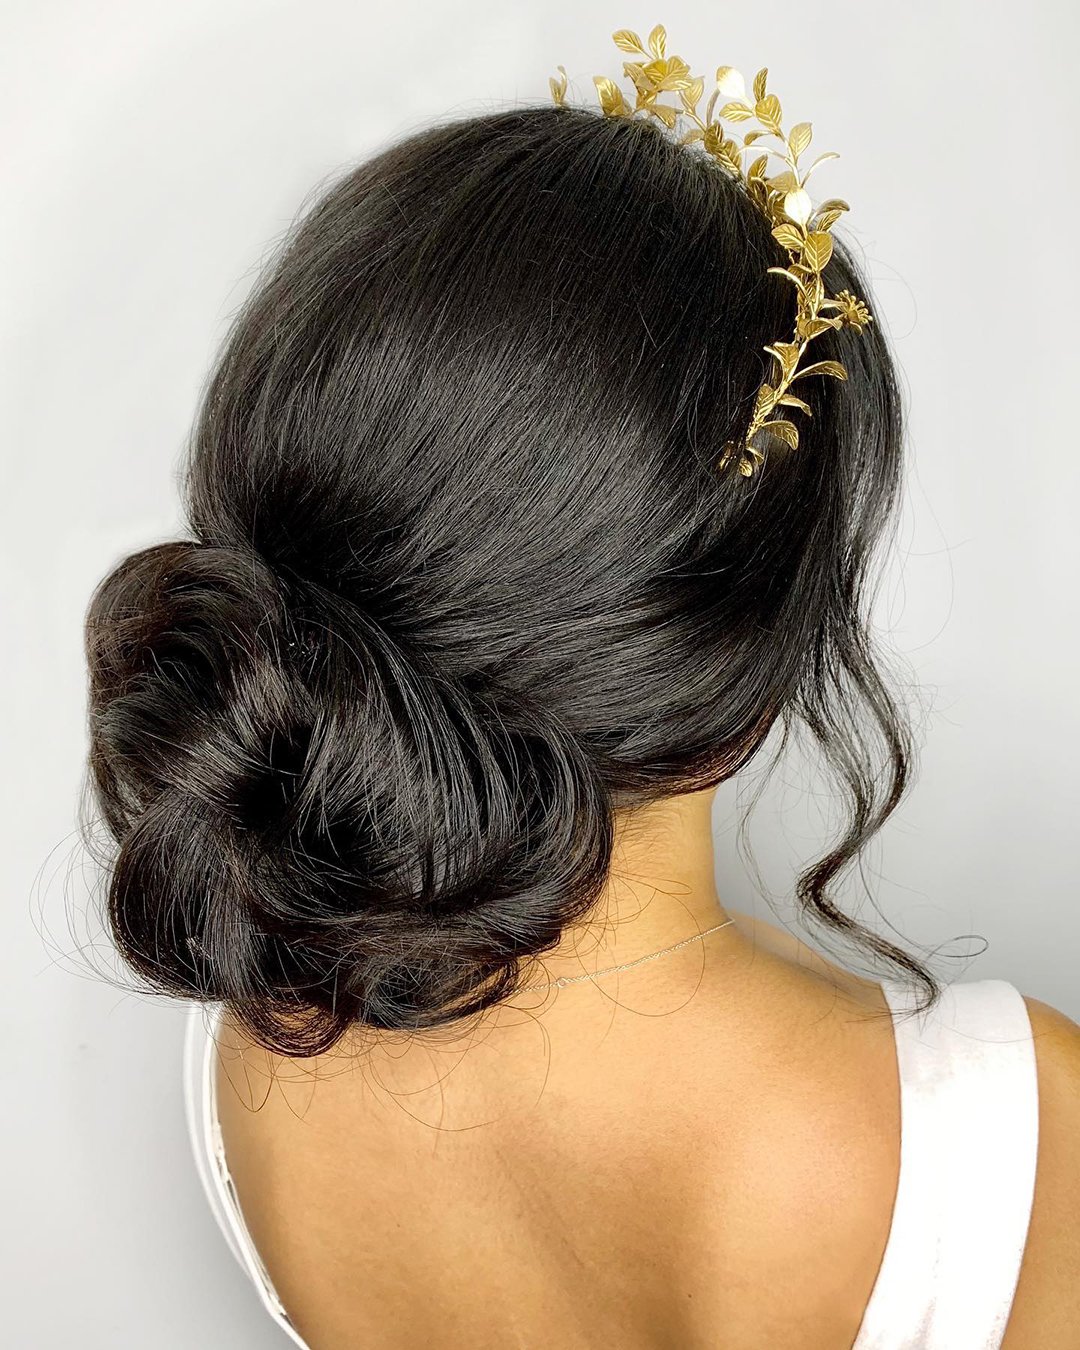 fall wedding hairstyles bun with gold flowers bridalhaircouturebykatie